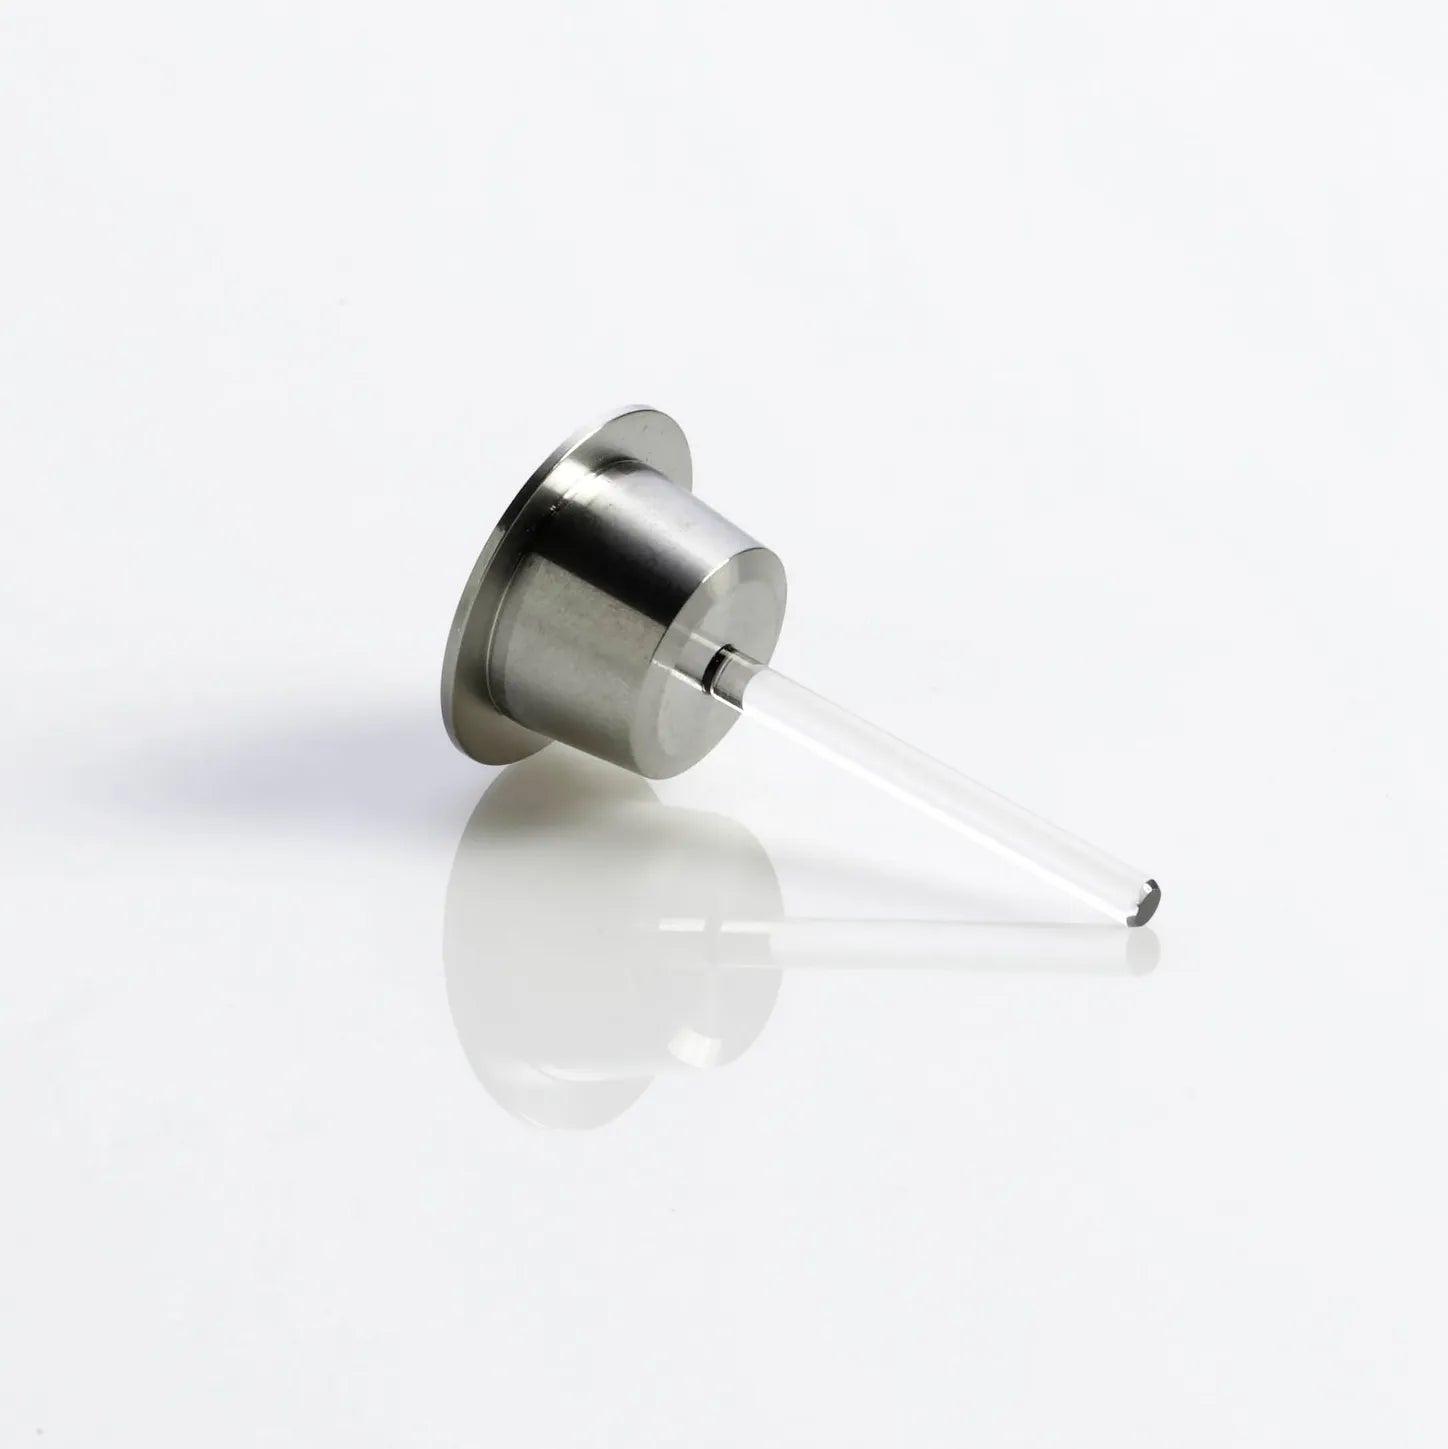 Sapphire Plunger, Comparable to Agilent # 5063-6586